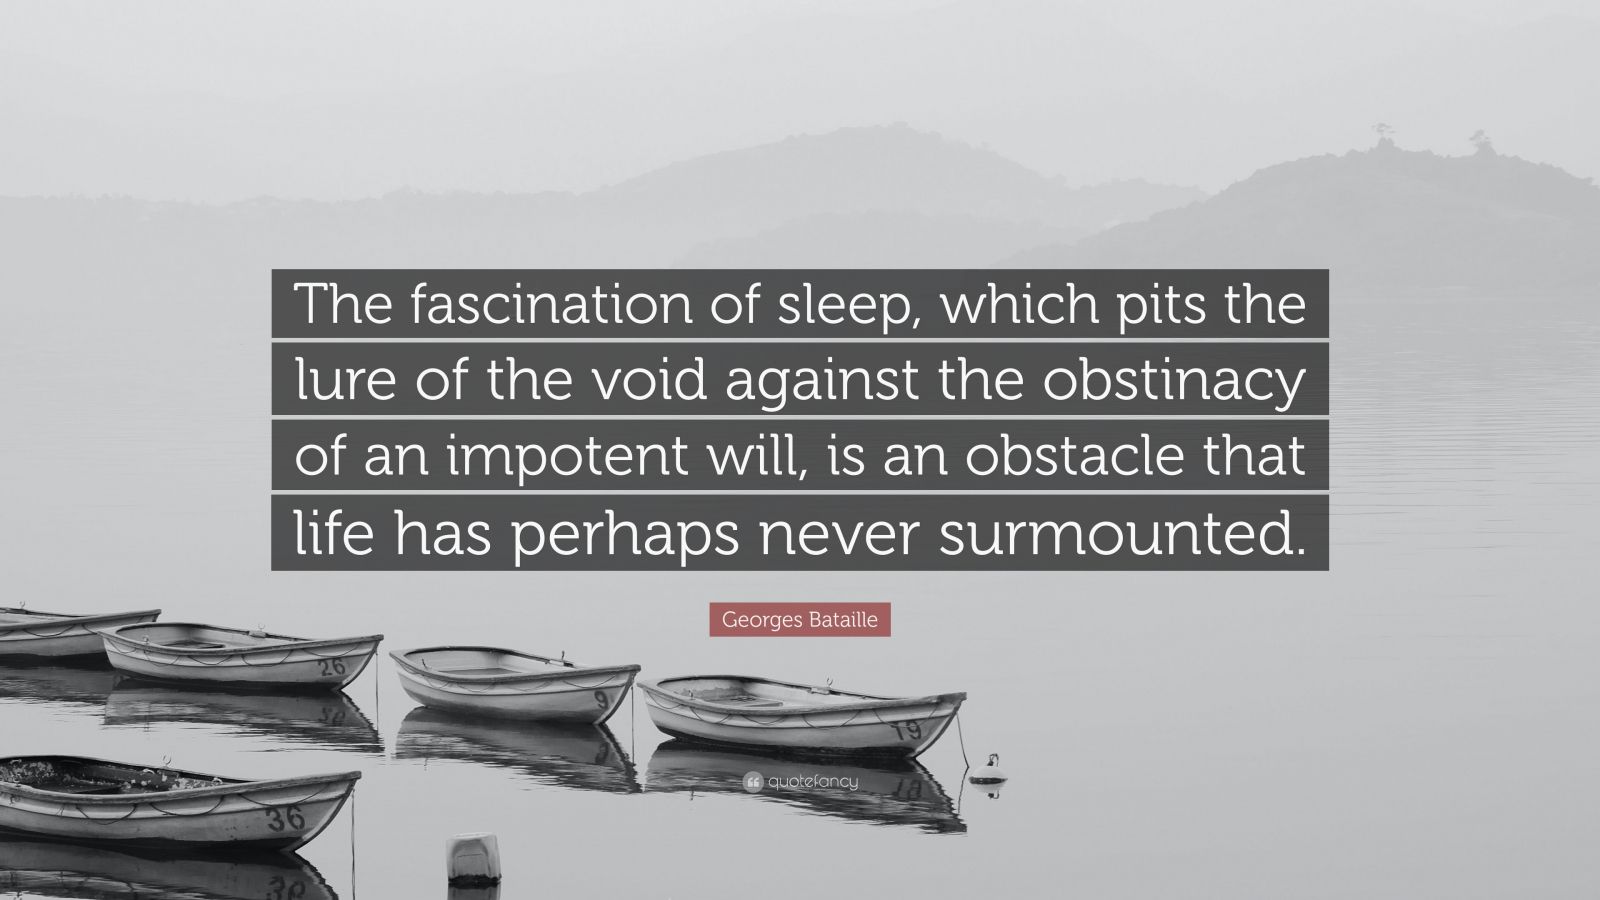 https://quotefancy.com/media/wallpaper/1600x900/6411074-Georges-Bataille-Quote-The-fascination-of-sleep-which-pits-the.jpg